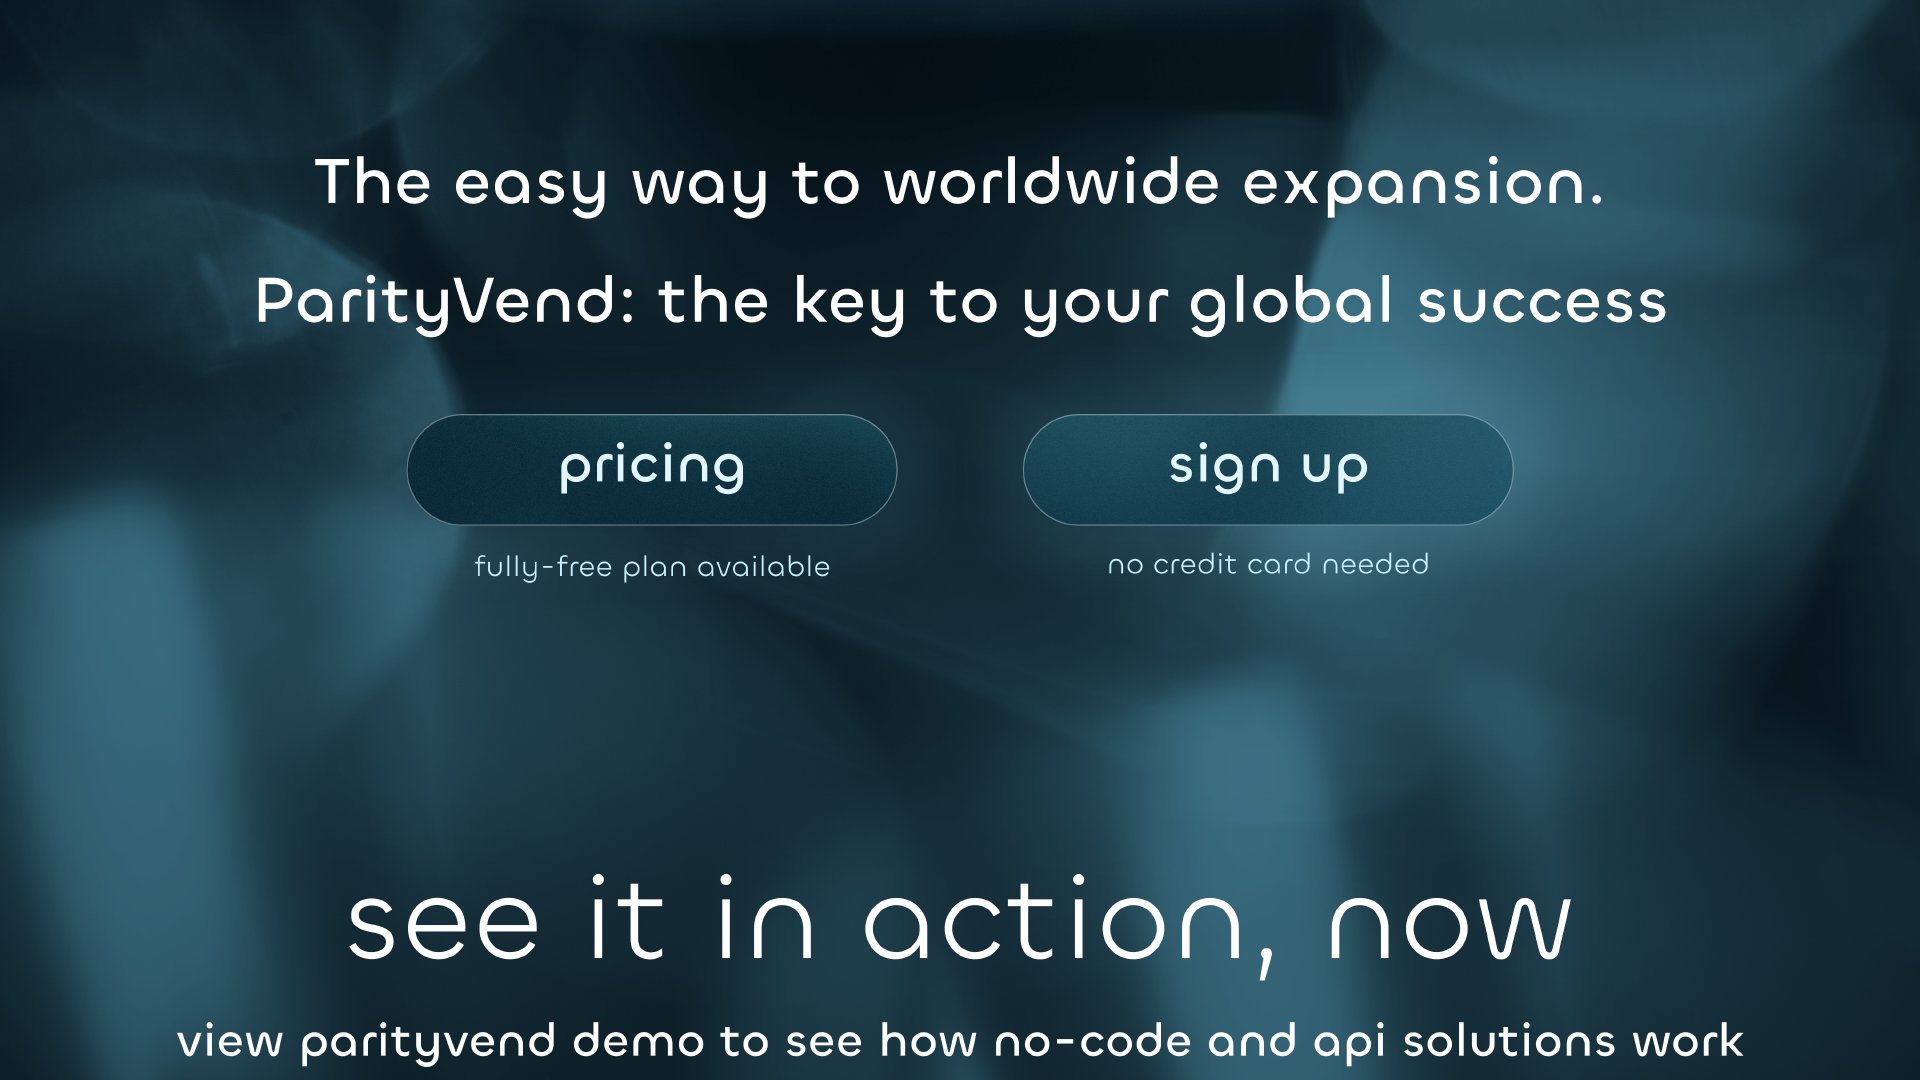 The easy way to worldwide expansion. ParityVend: The key to your global success. Fully-free plan available. No credit card needed. See it in action now. View the ParityVend demo to see how No-Code and API solutions work.